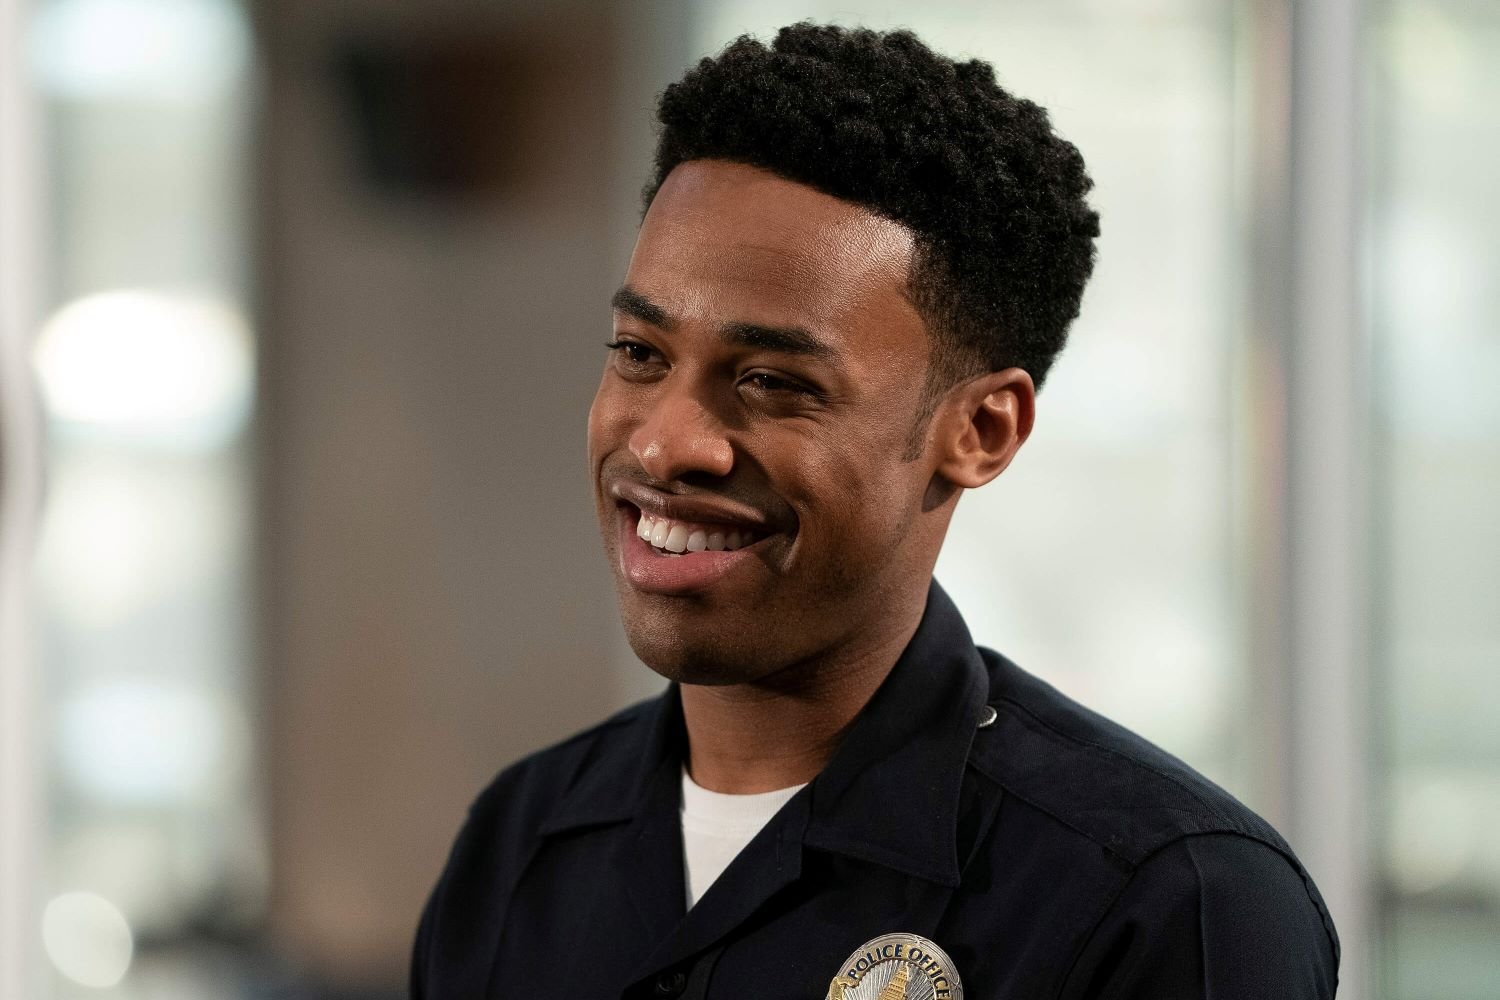 Titus Makin Jr, in character as Jackson West in 'The Rookie' on ABC, wears his dark blue police uniform over a white shirt.